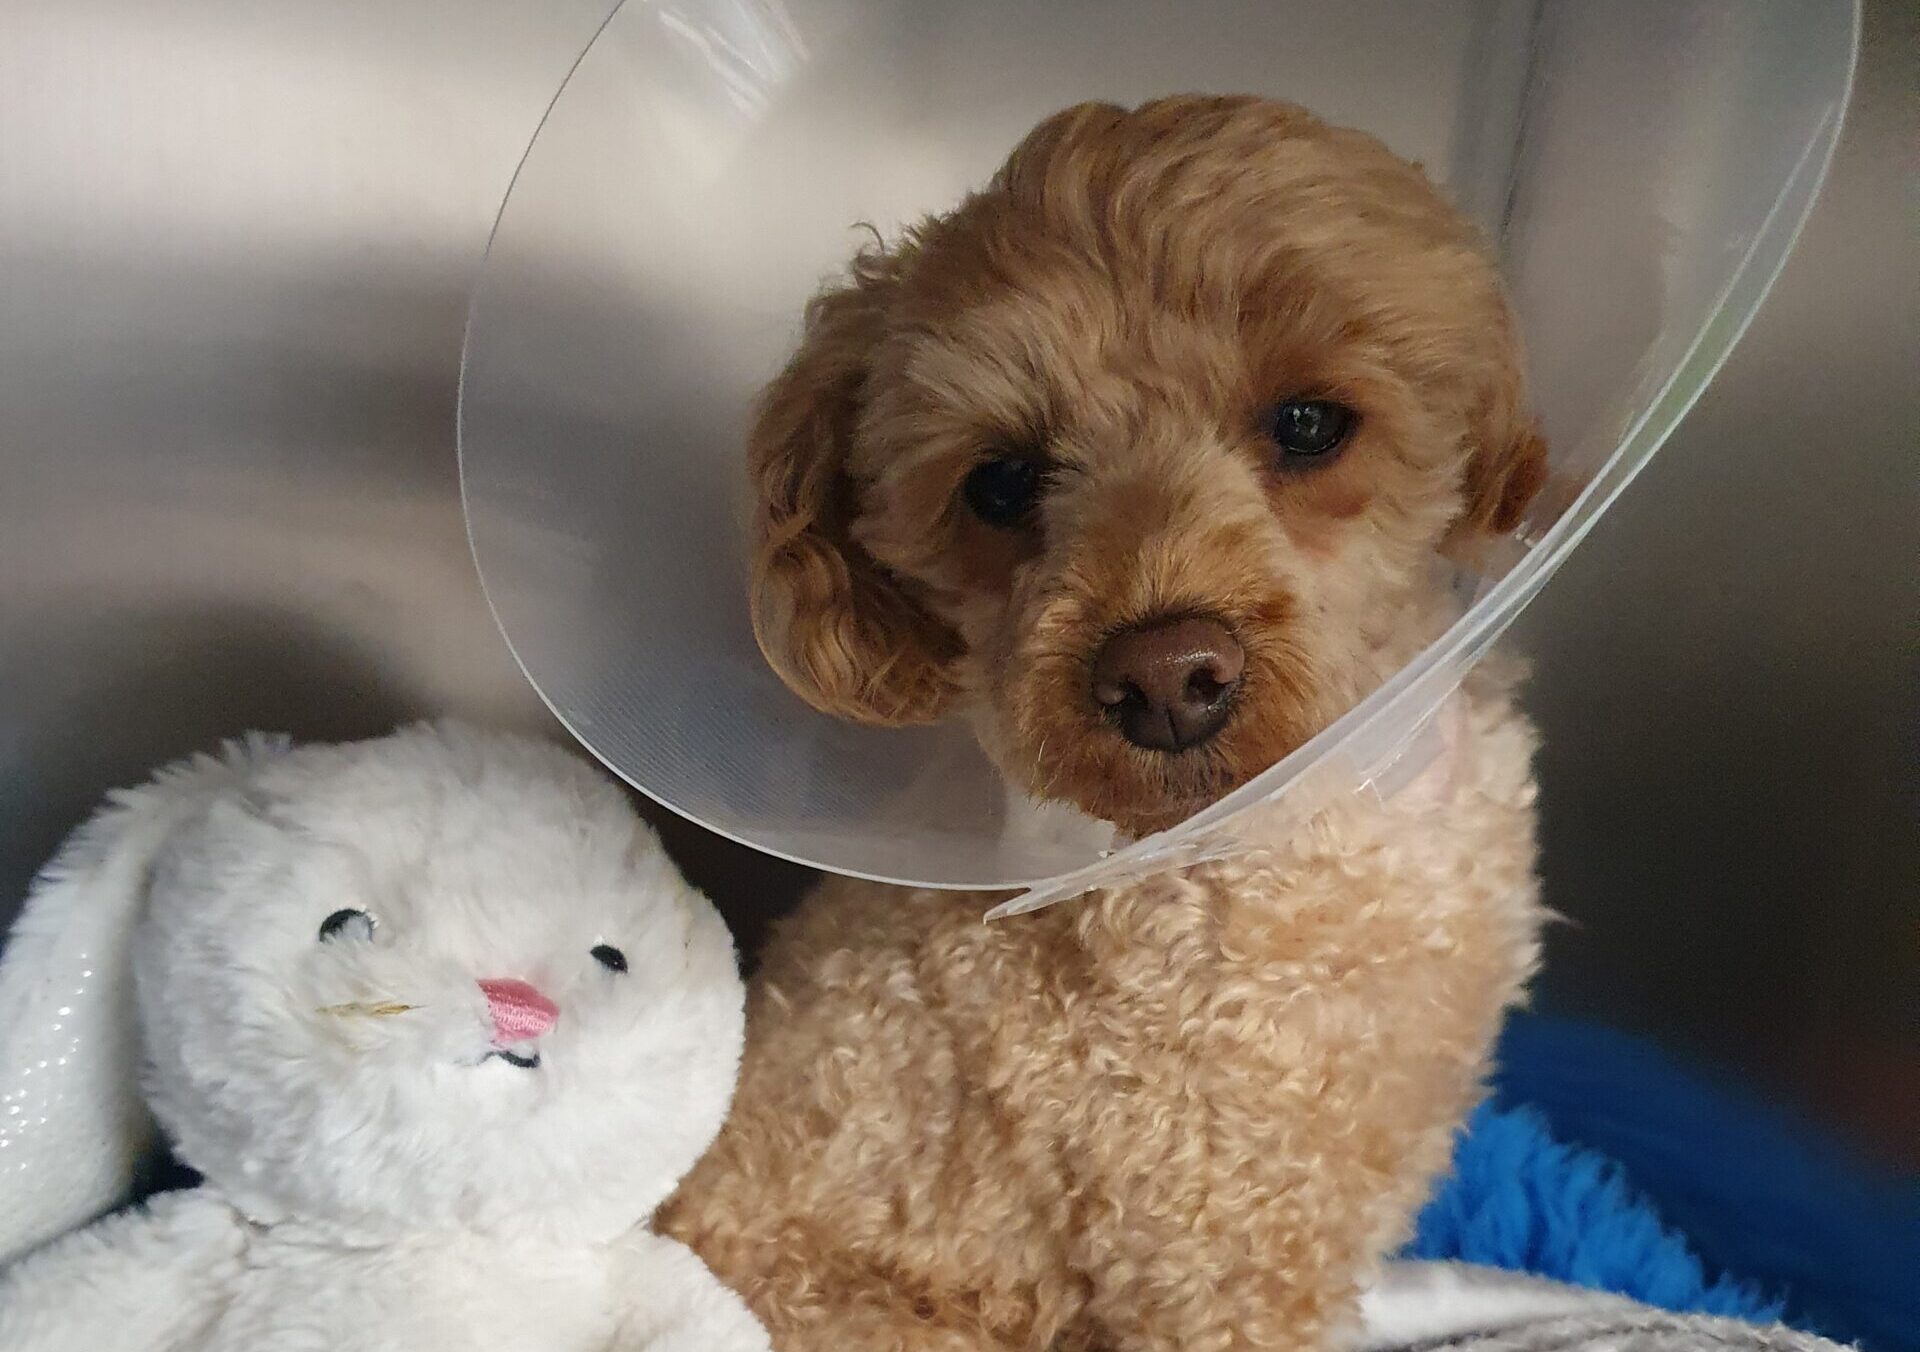 a dog recovering from surgery on a bladder stone